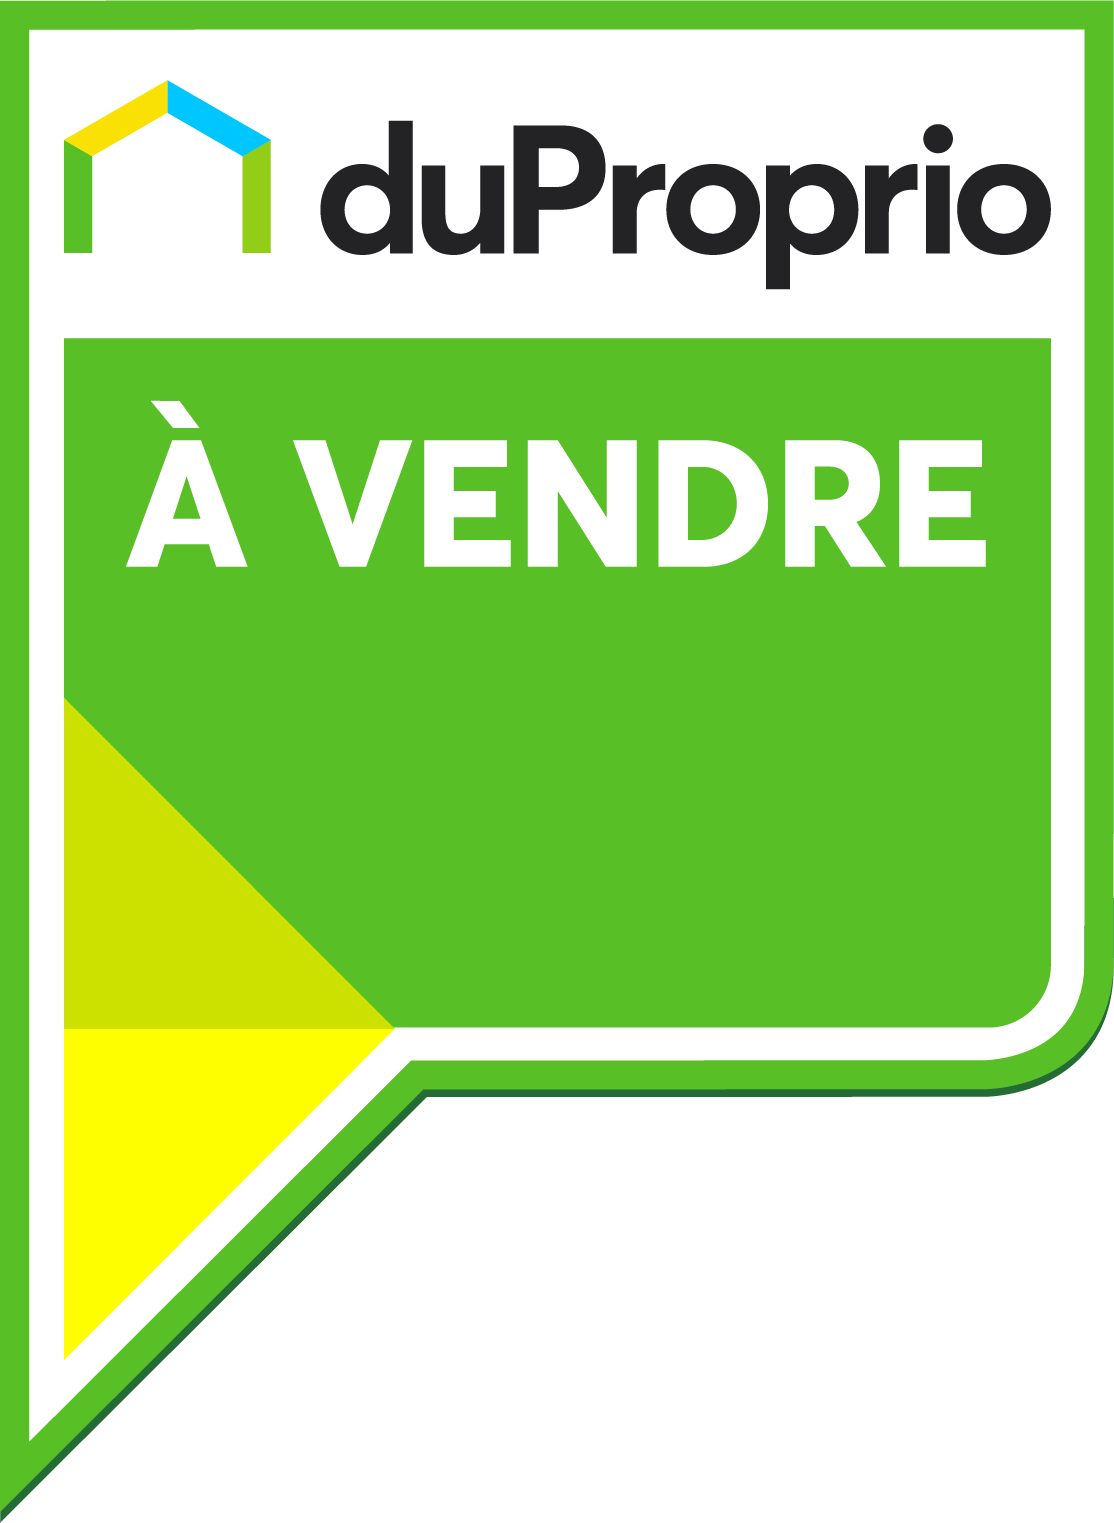 Official images photos and logos | DuProprio